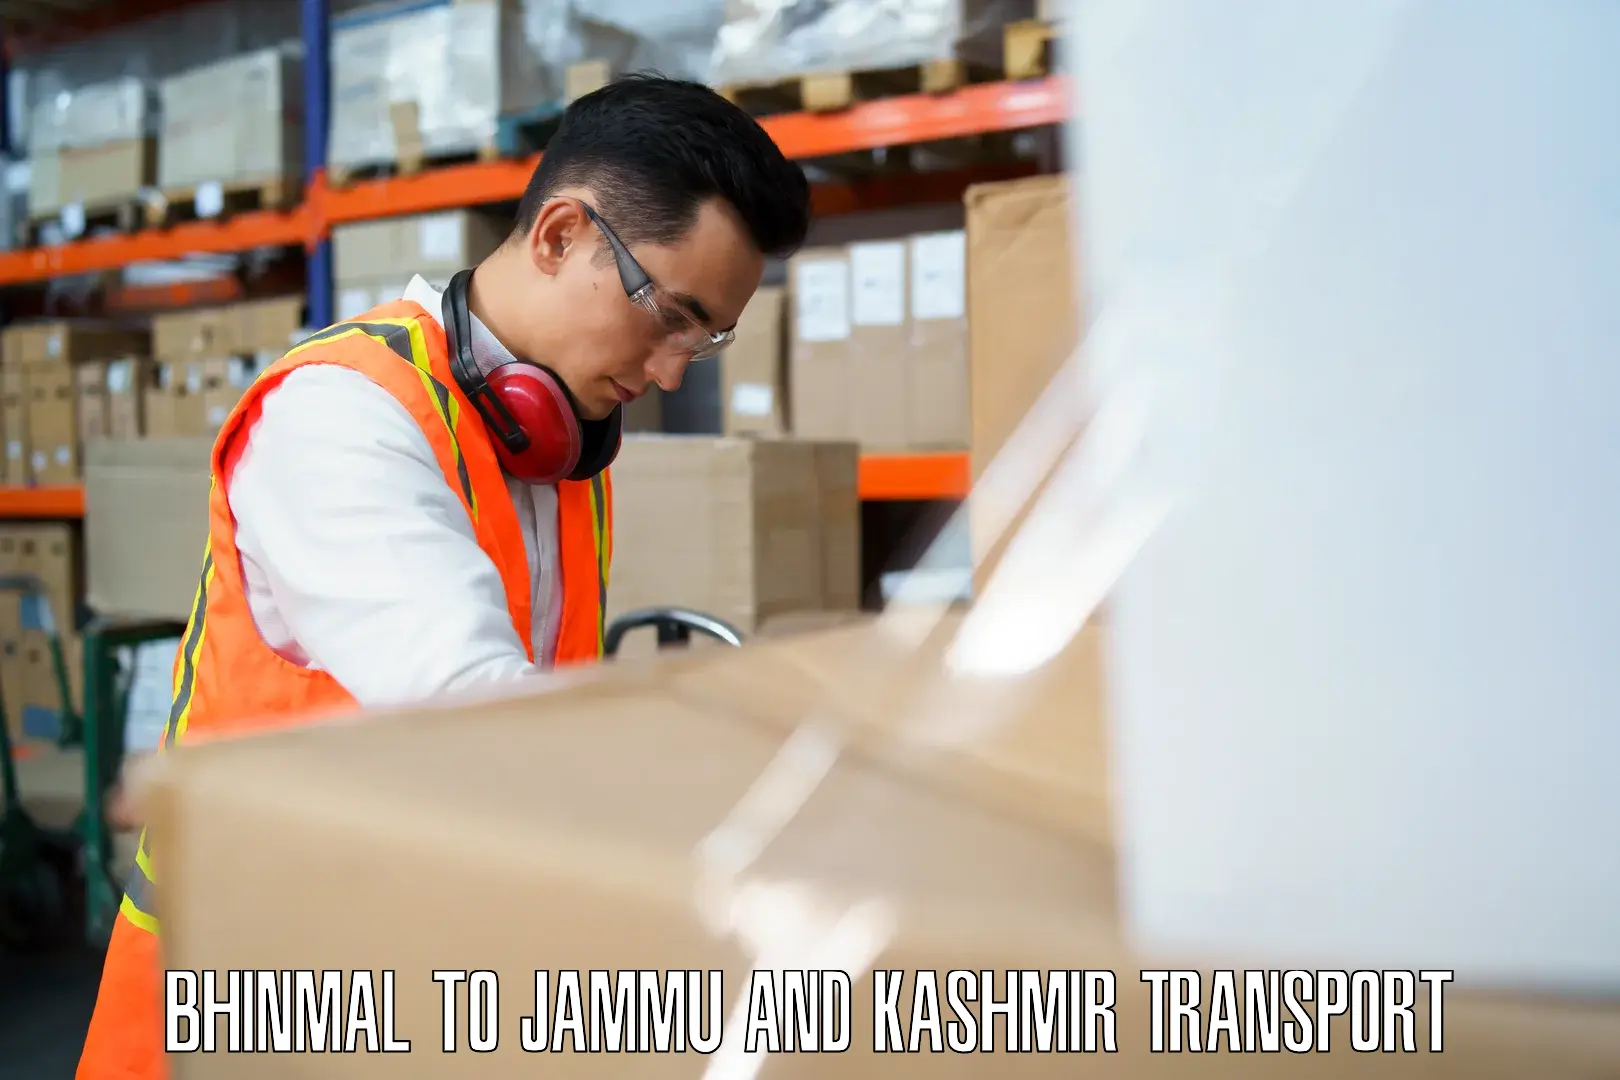 Cargo train transport services Bhinmal to Jammu and Kashmir